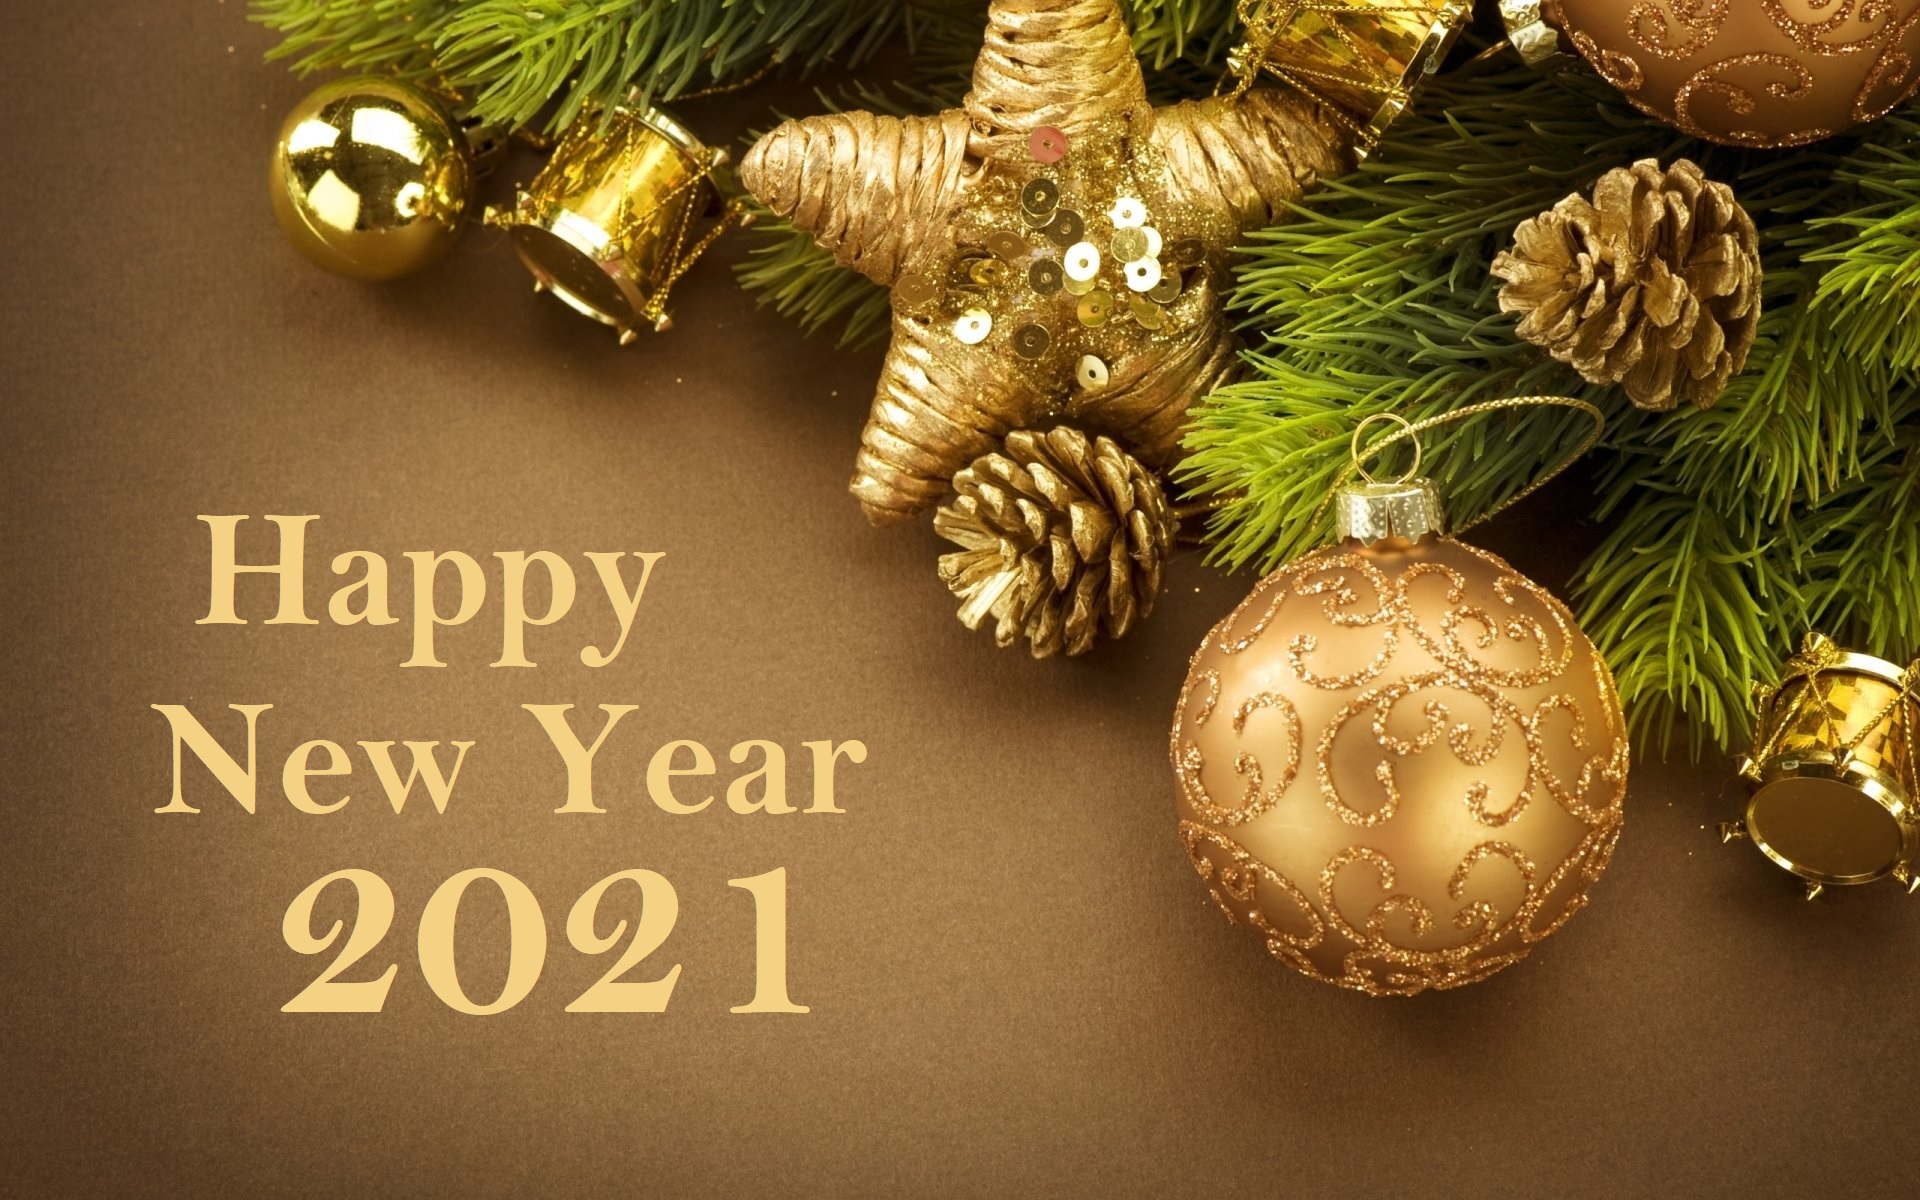 holiday, new year 2021, christmas ornaments